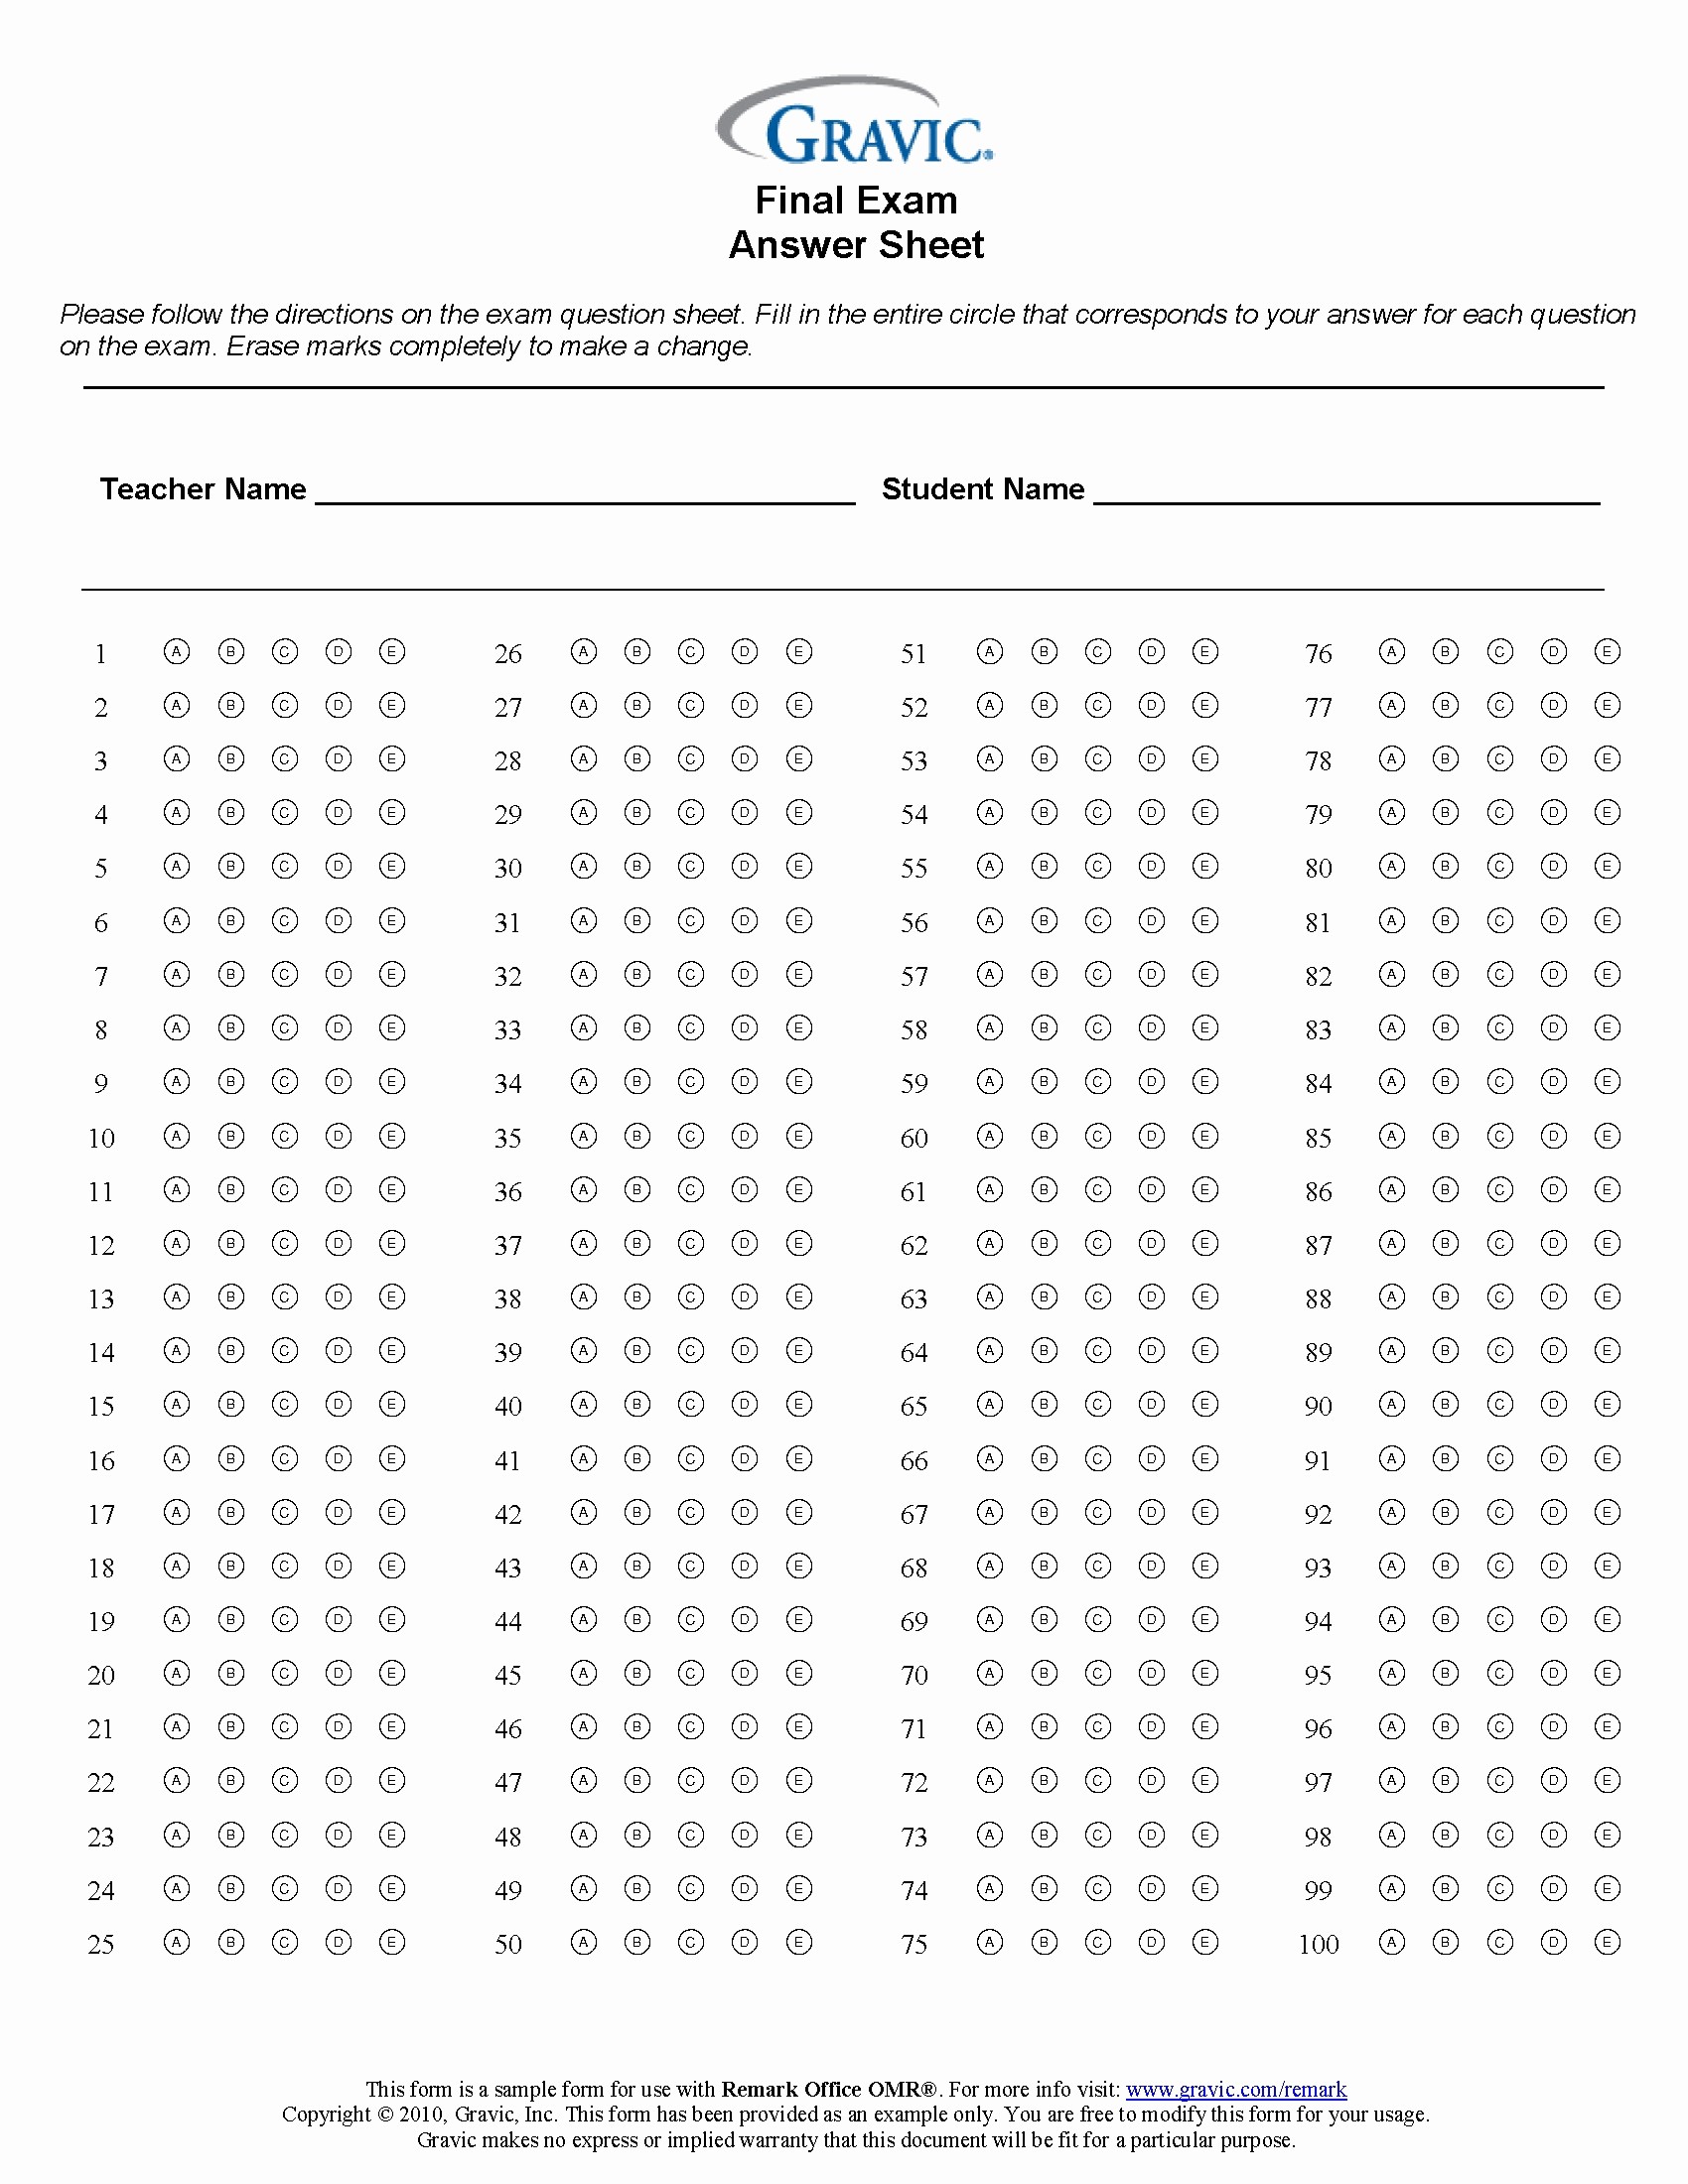 Answer Sheet Template Microsoft Word Awesome Microsoft Word Test Template Portablegasgrillweber